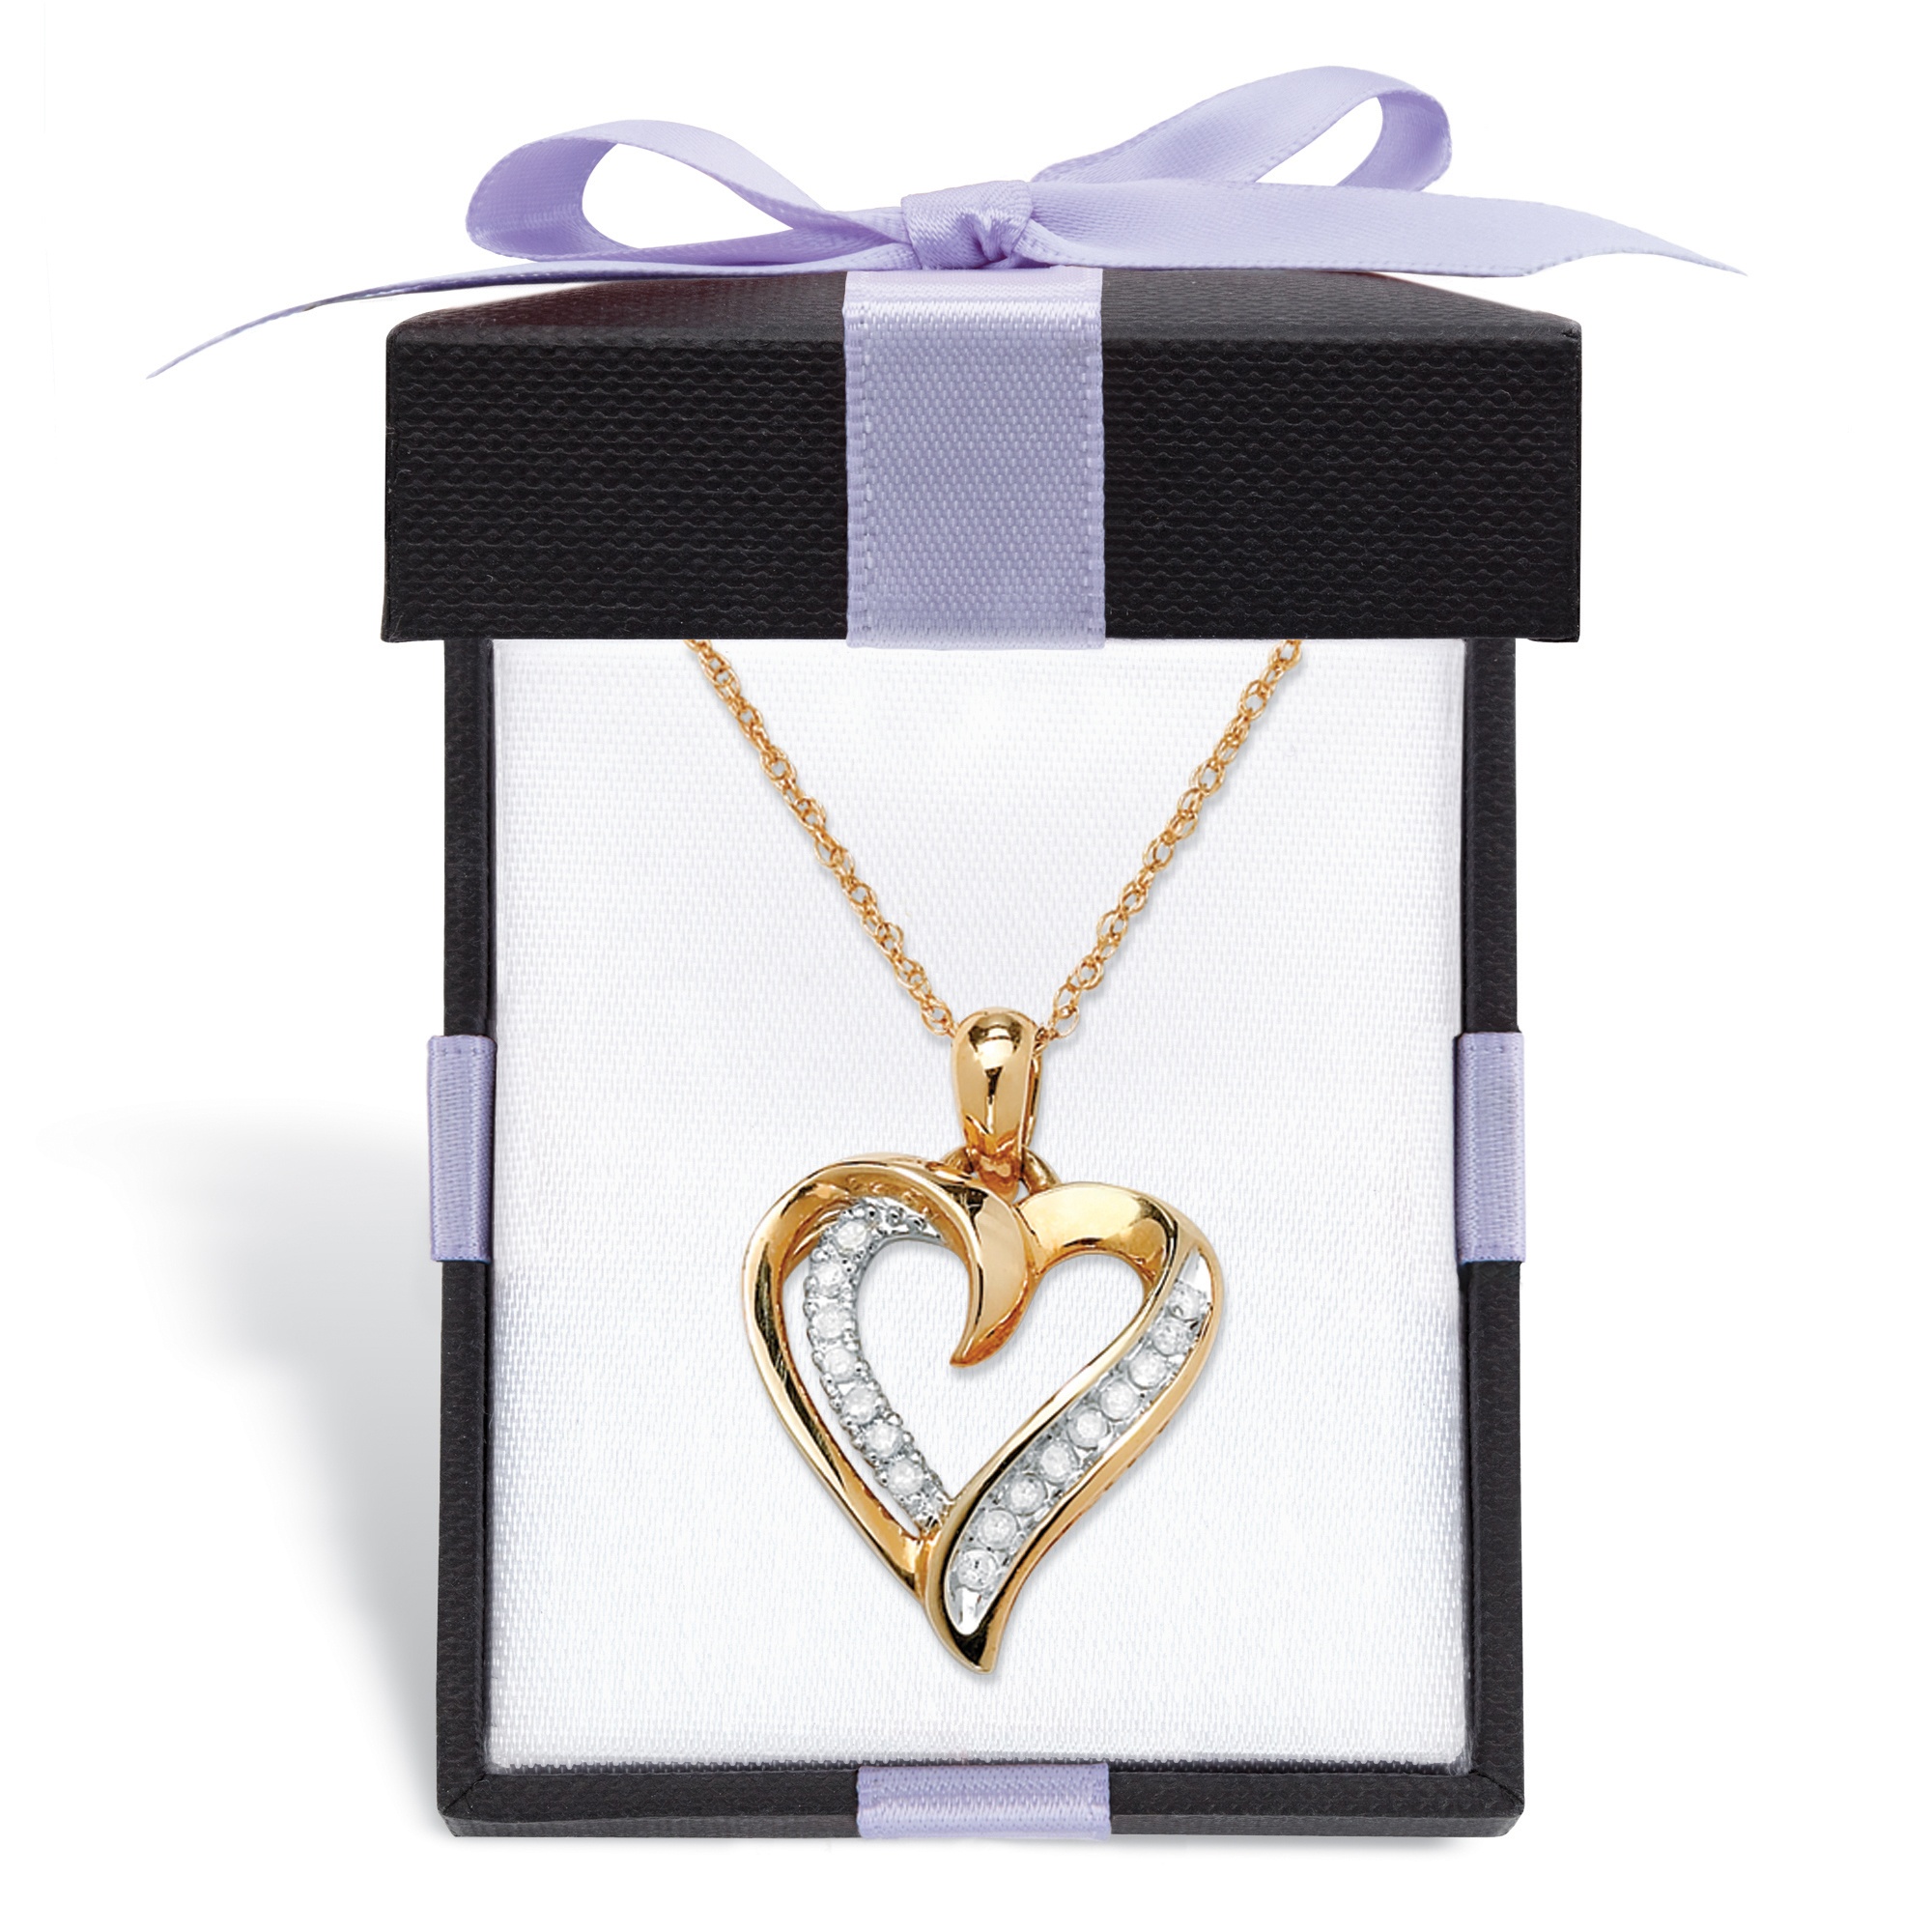 1/10 TCW Round Diamond Heart Pendant Necklace in 10k Gold 18" at